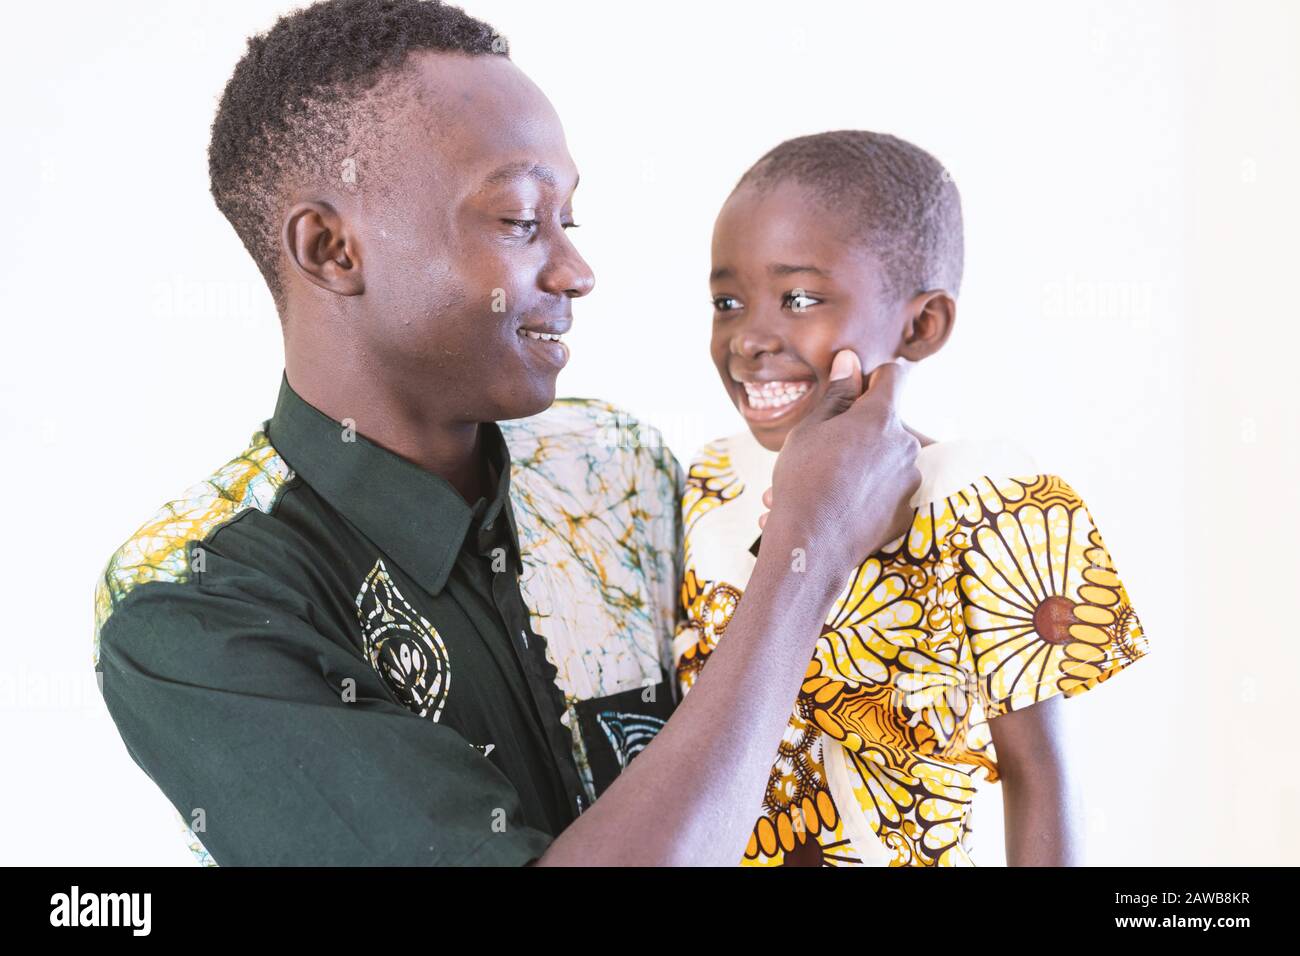 African dad and son posing together in front of camera laughing and smiling in front of white background Stock Photo